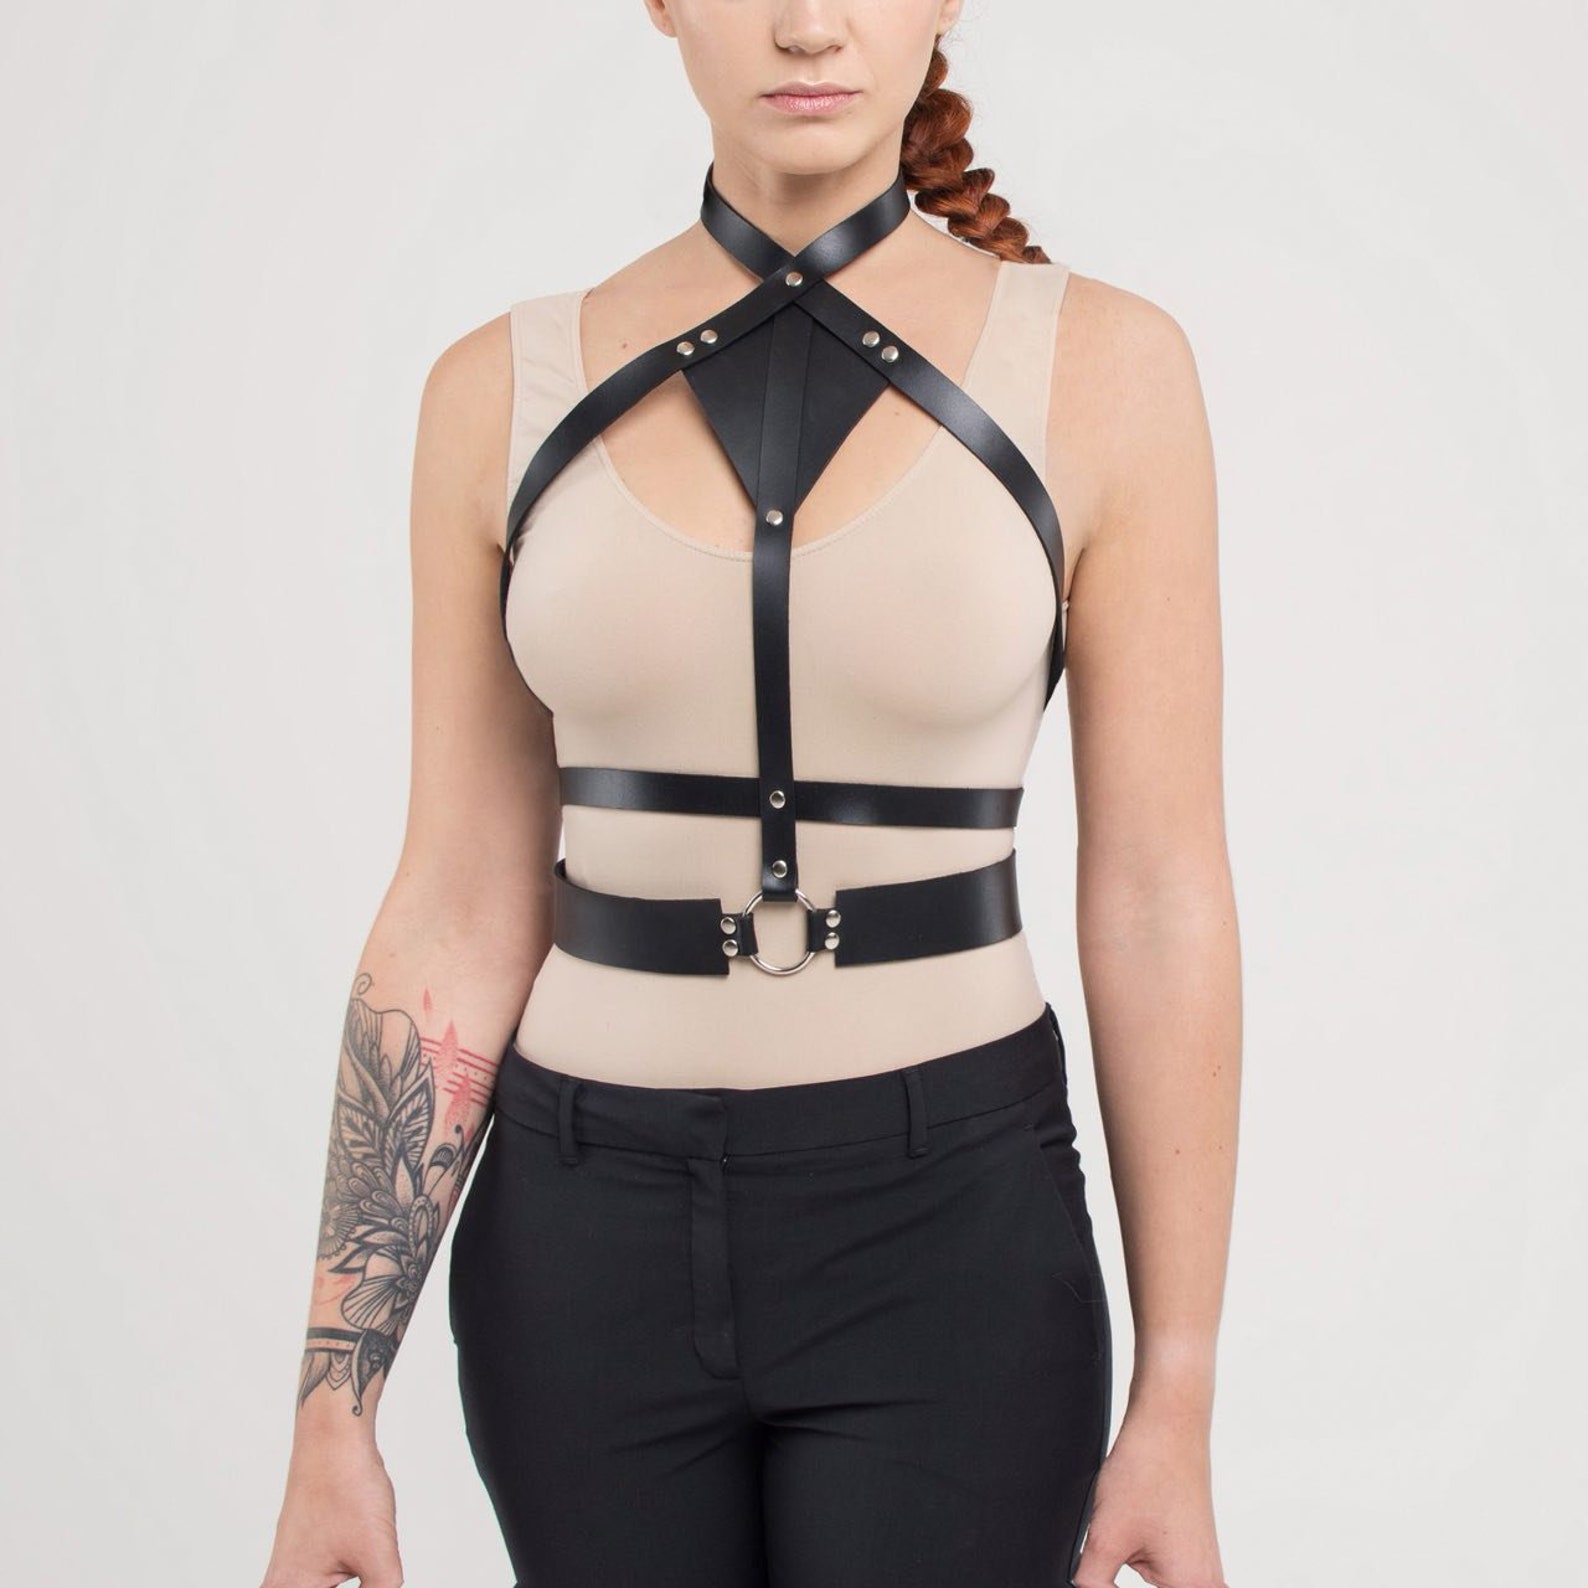 Leather Harness For Women Plus Size Harness Fashion Harness Etsy